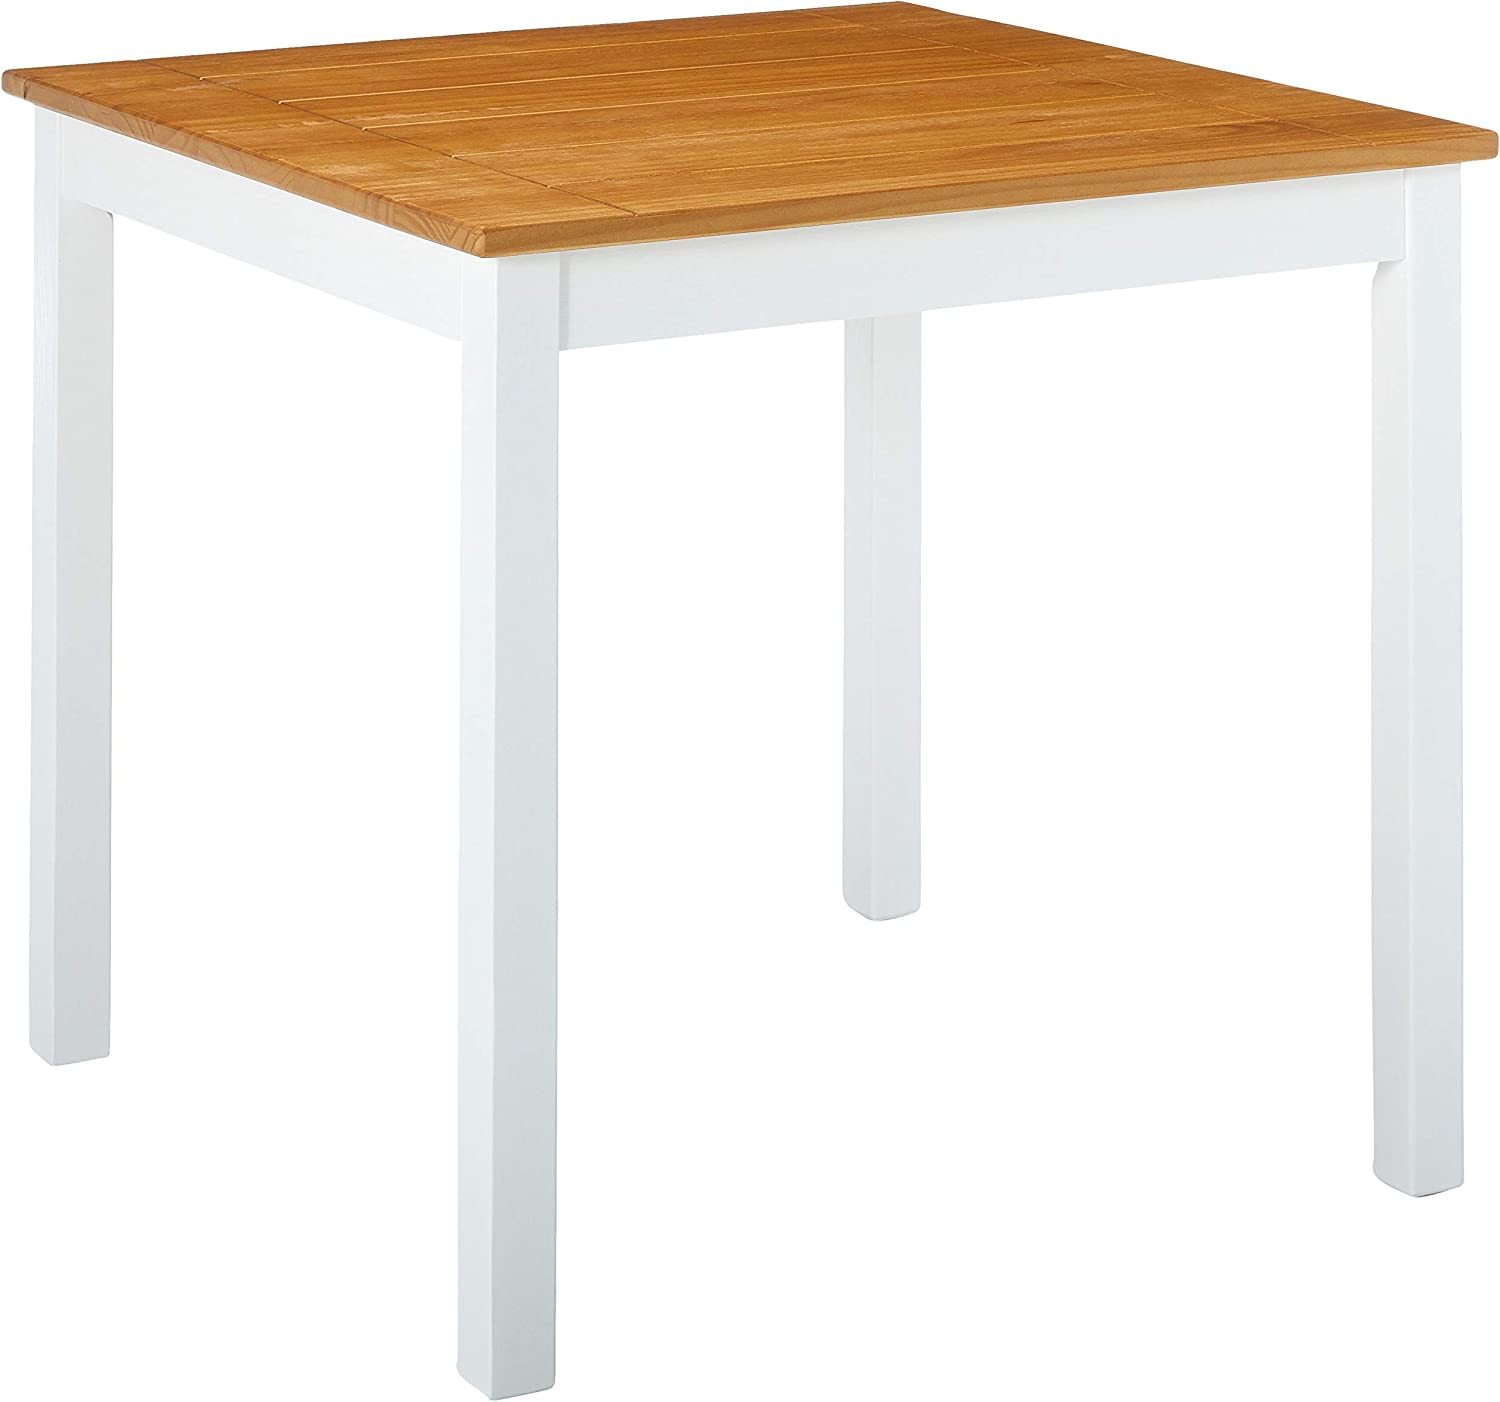 Zinus Becky Farmhouse Square Wood Dining Table - $107.99